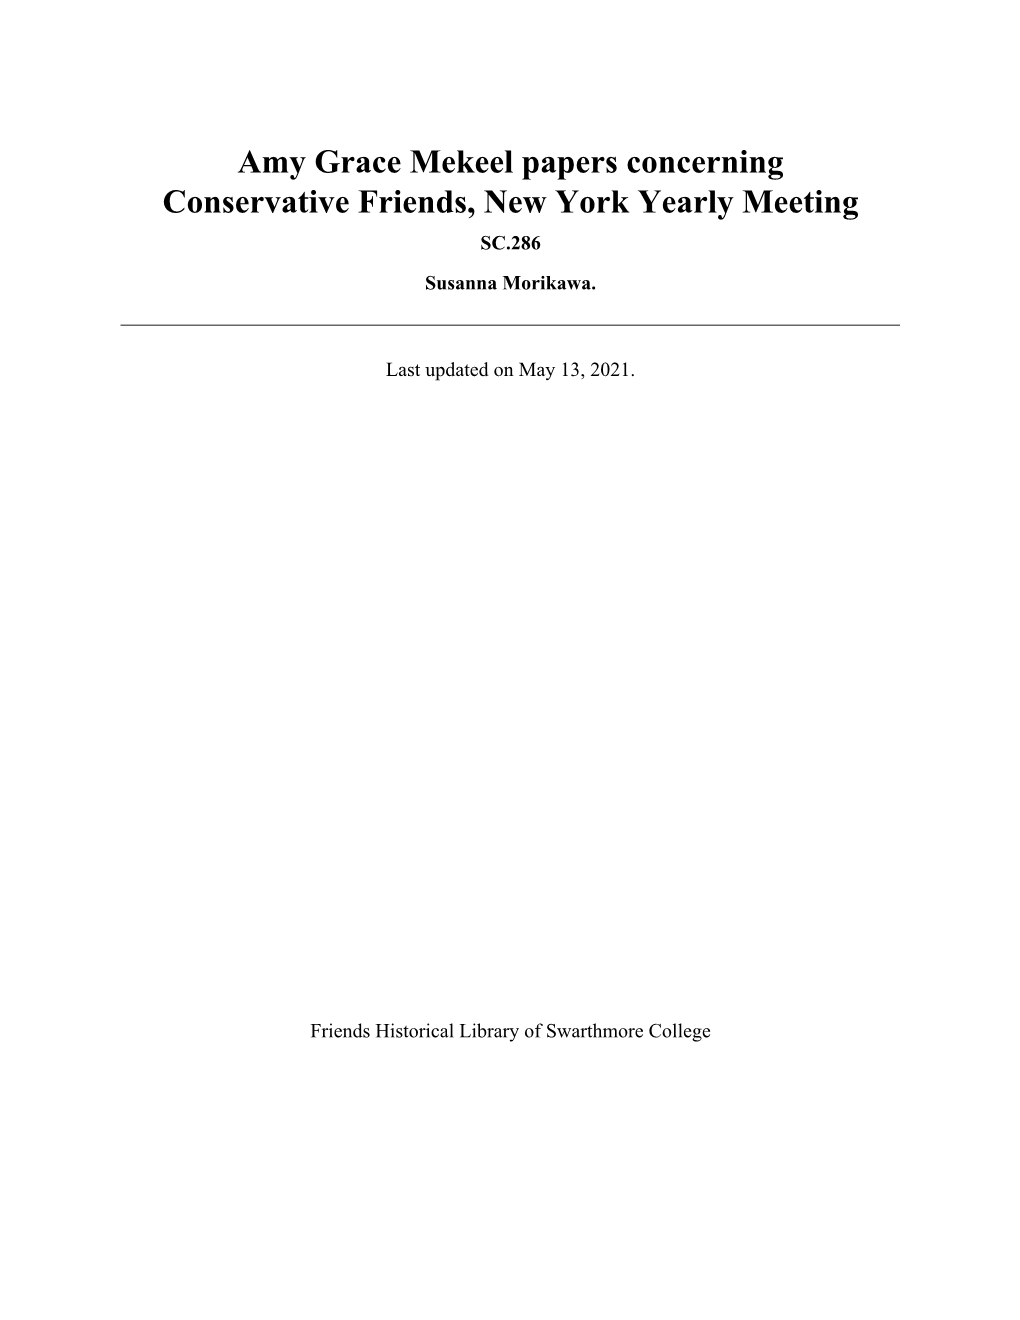 Amy Grace Mekeel Papers Concerning Conservative Friends, New York Yearly Meeting SC.286 Susanna Morikawa